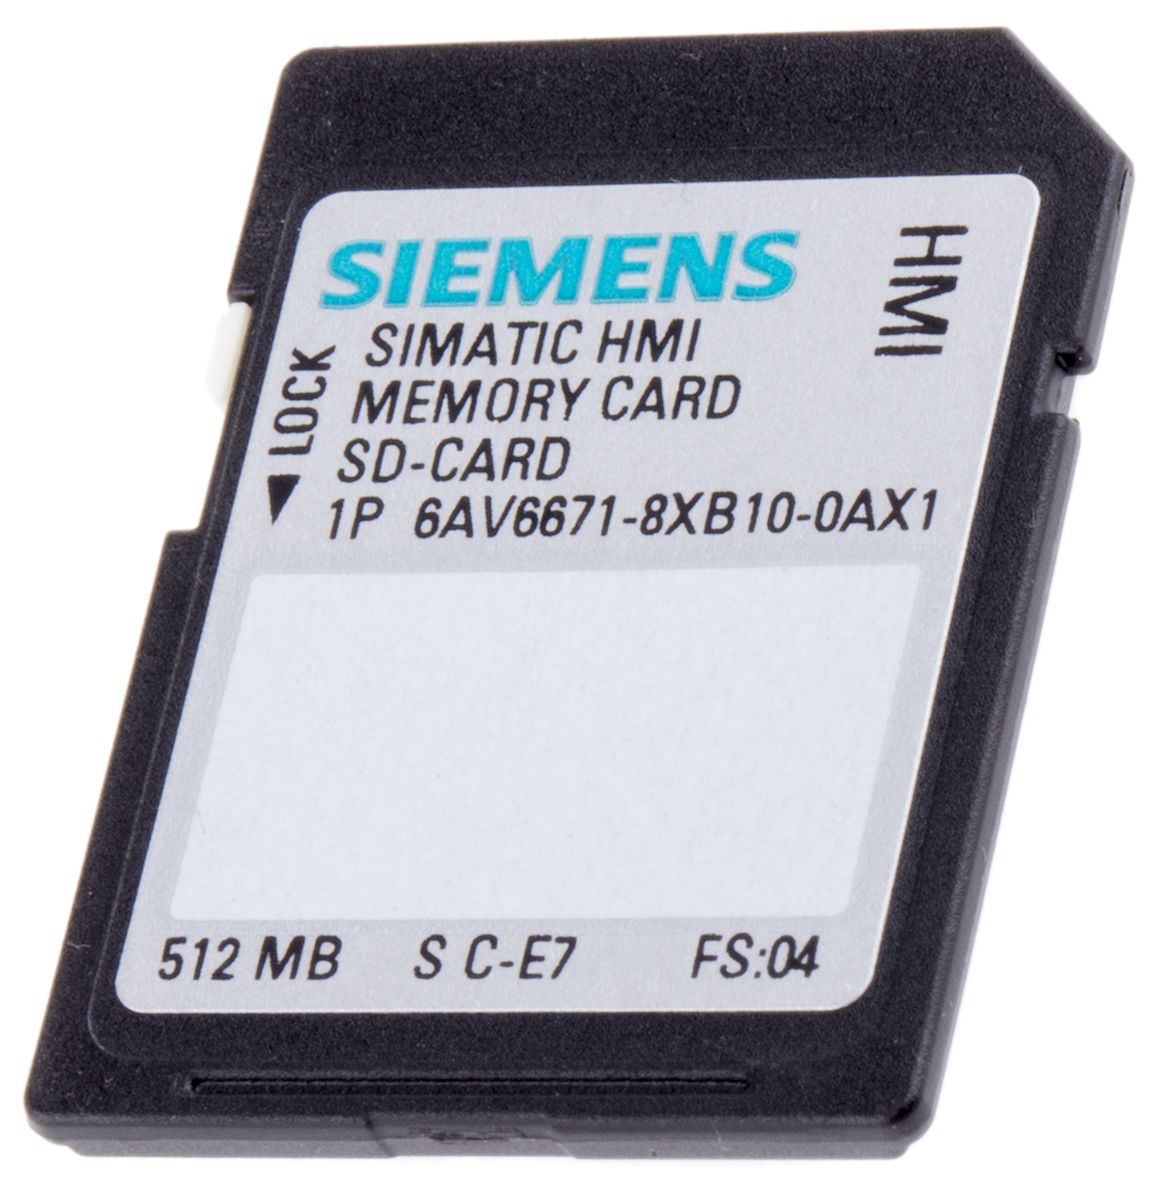 Siemens Memory Card For Use With HMI Mobile Panel 177, Mobile Panel 277, Mobile Panel 377, OP 77, TP/OP 177/277